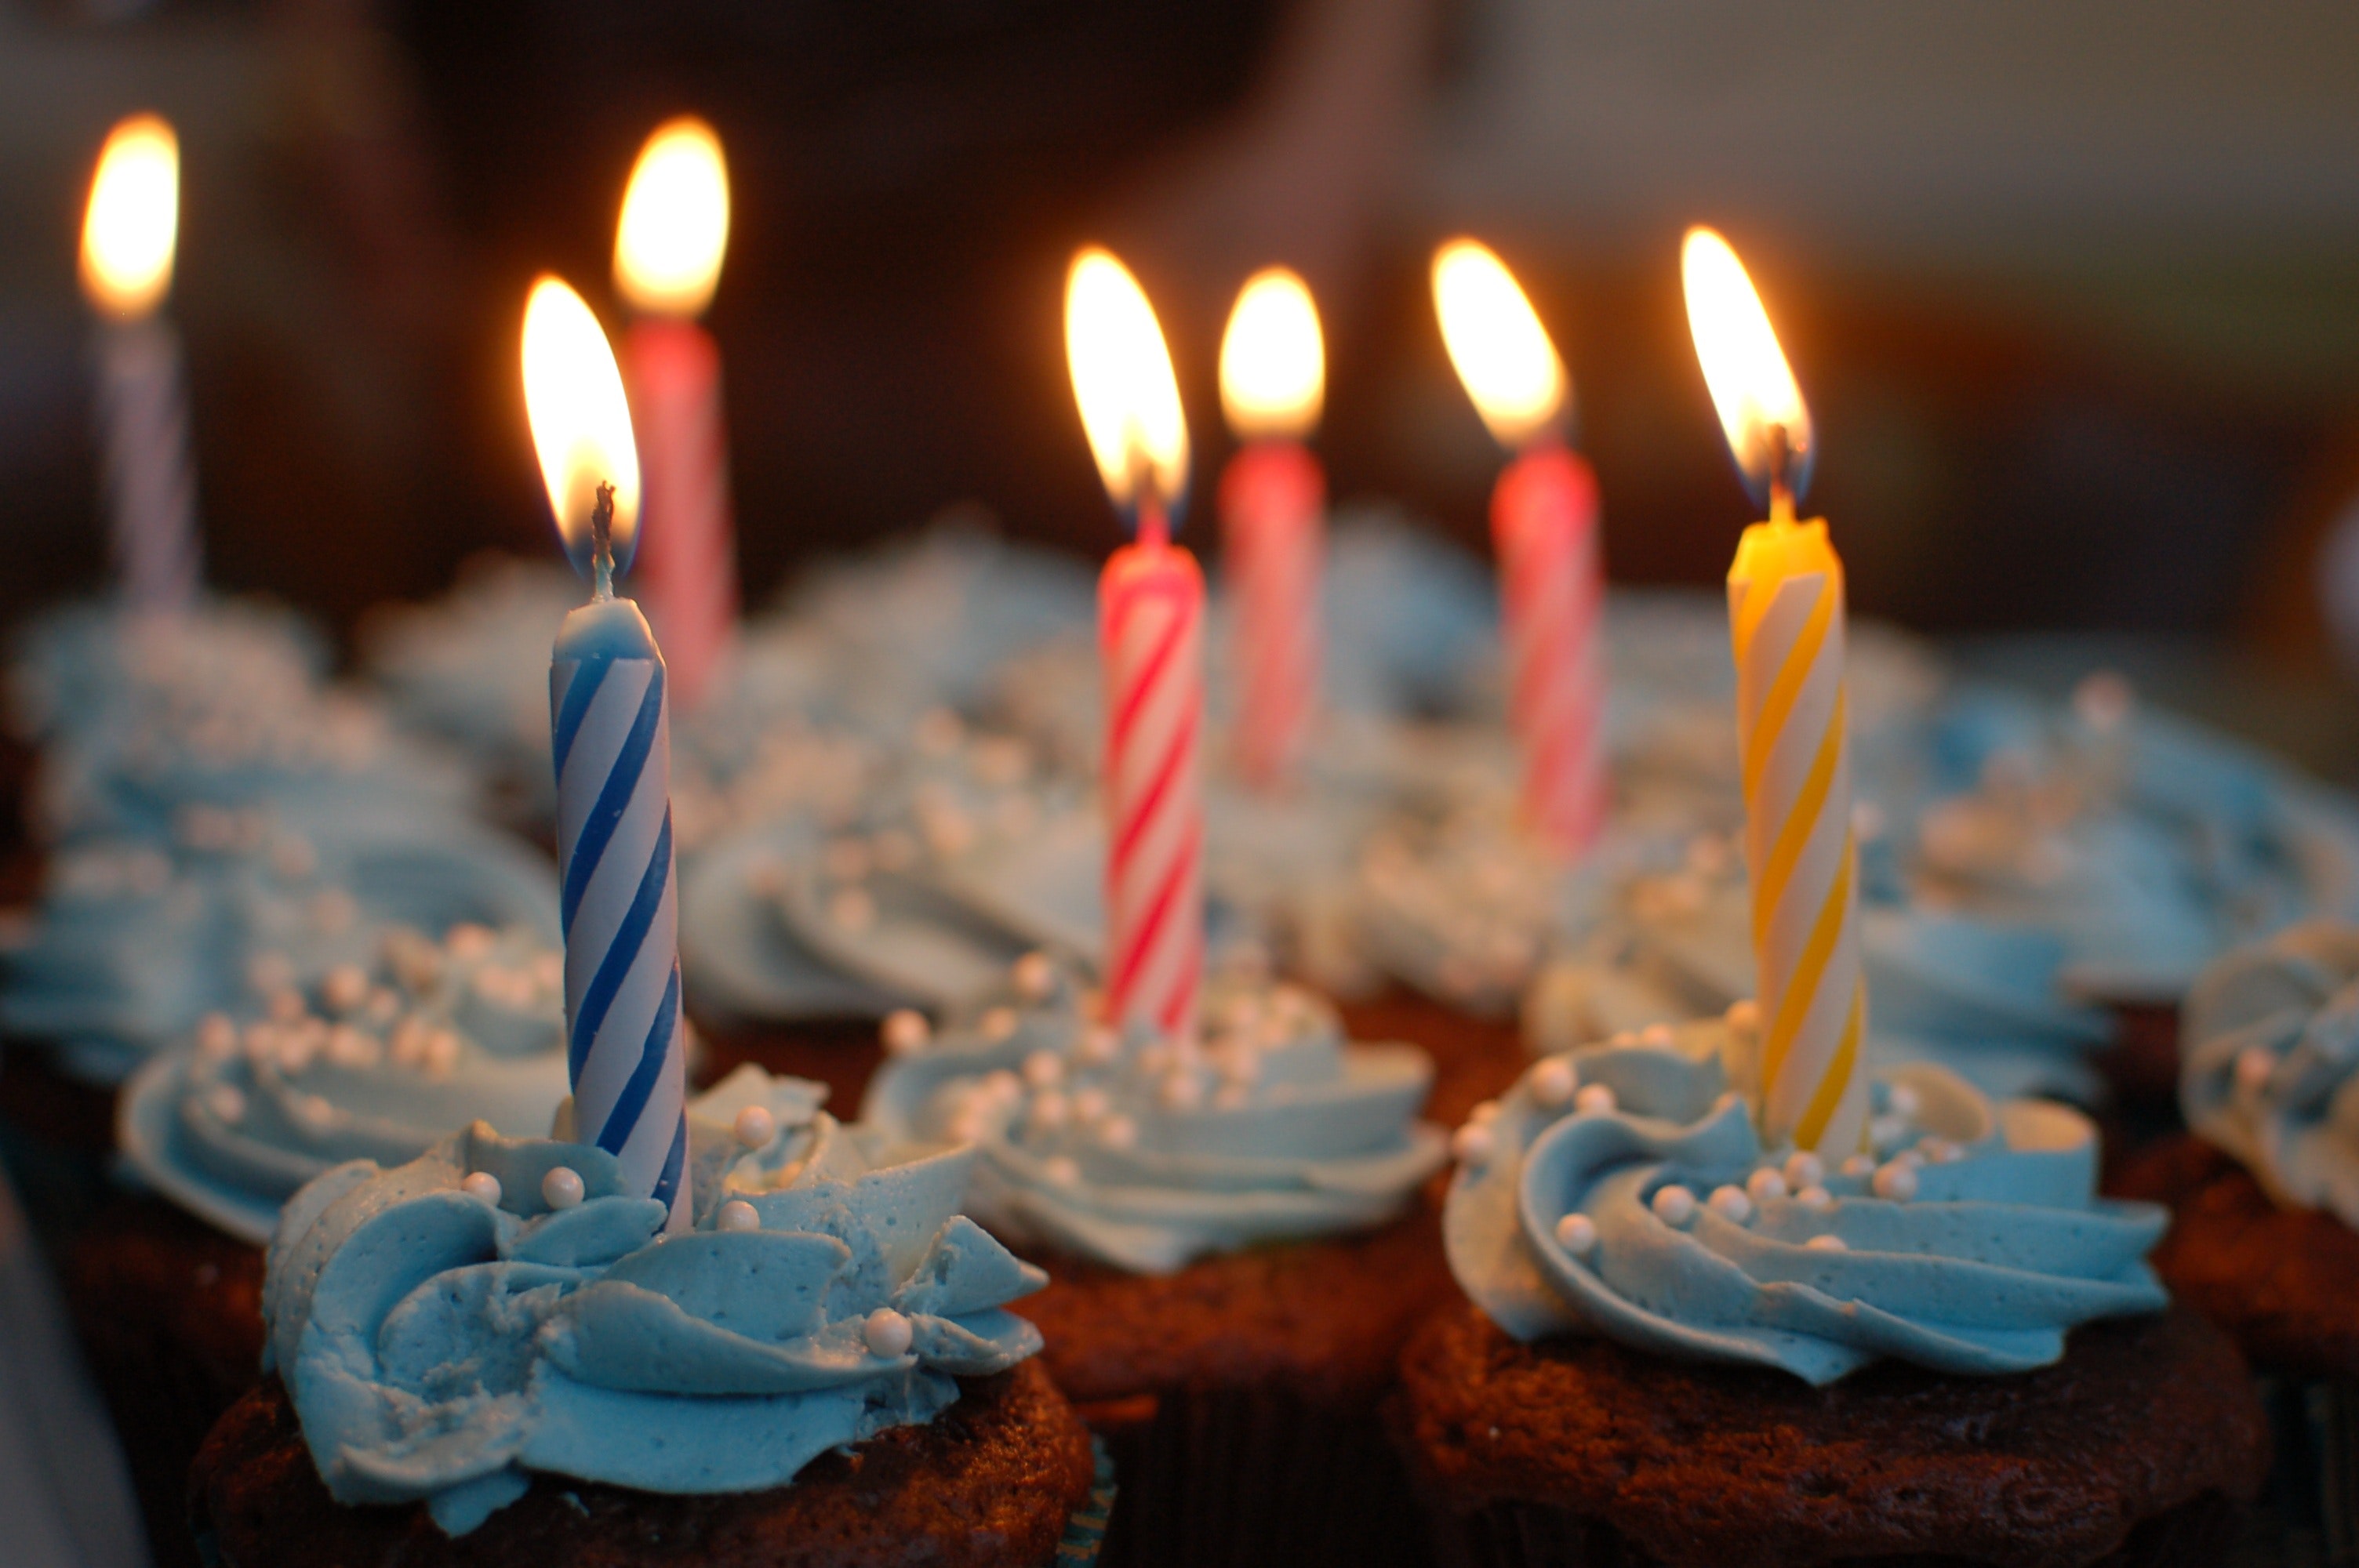 Lighted Candles on Cupcakes, Birthday, Blur, Cake, Candles, HQ Photo